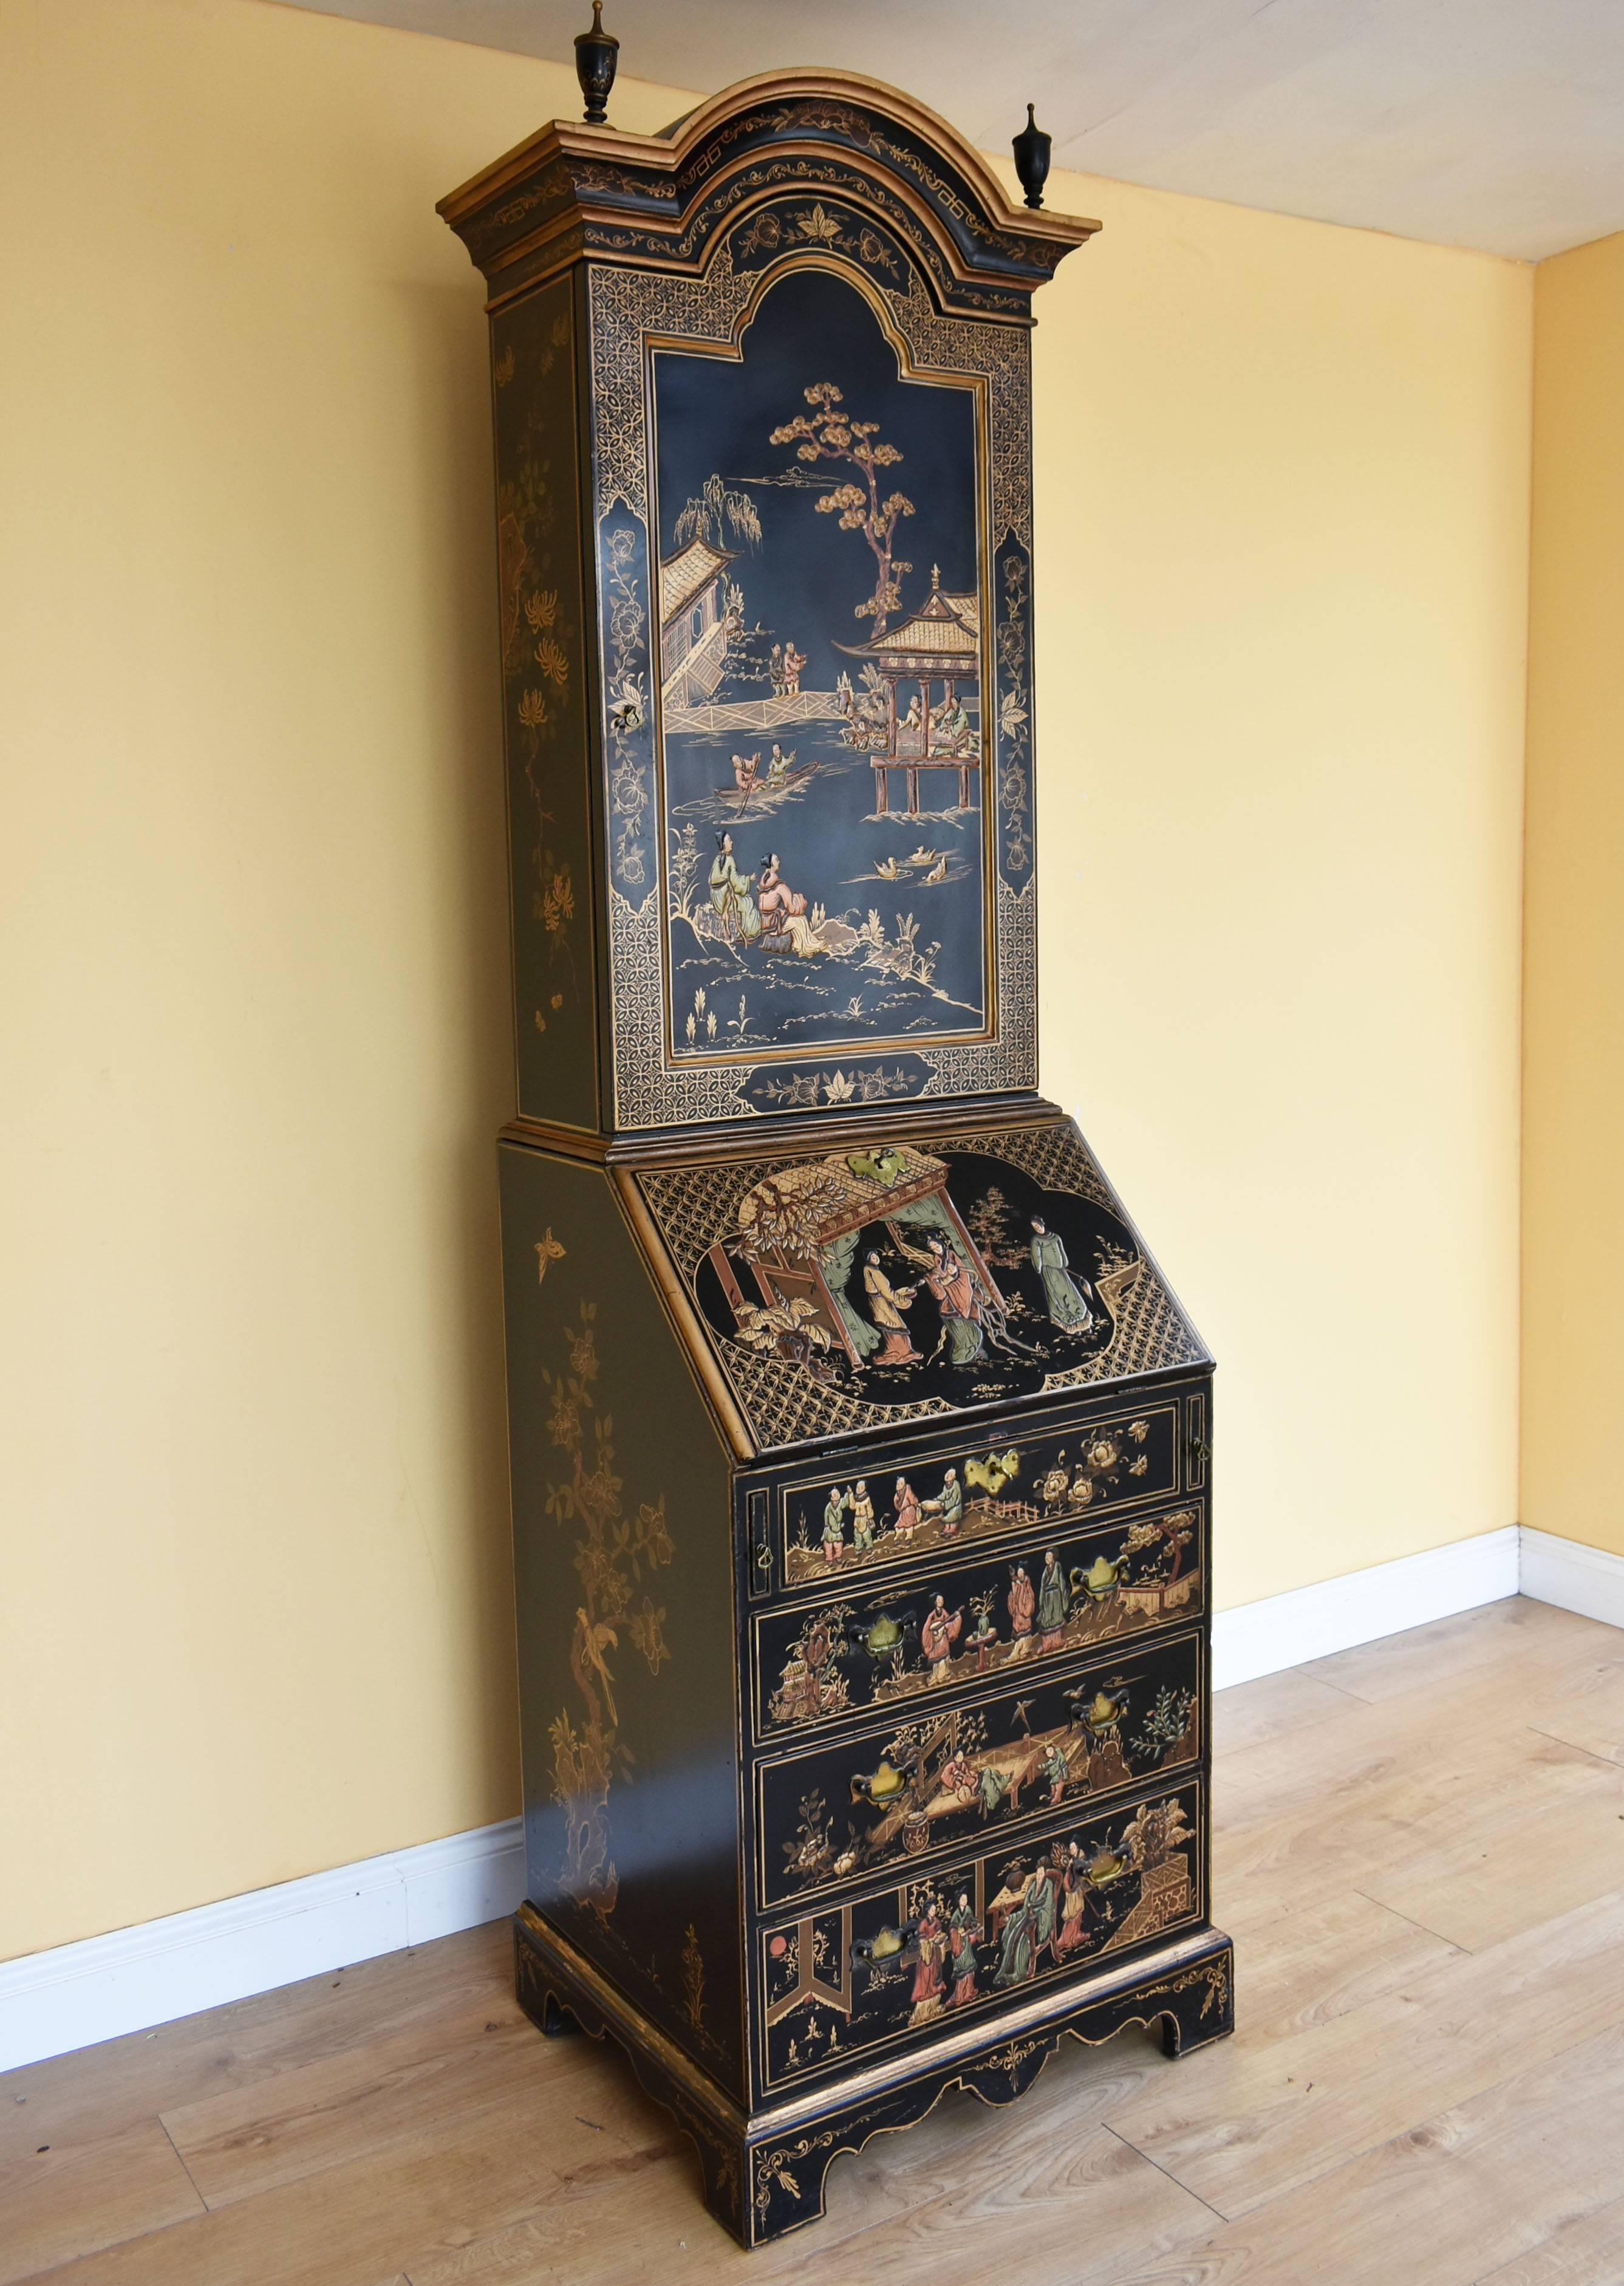 For sale is a good quality chinoiserie 20th century Bureau bookcase in good condition with detailed chinoiserie to the top section, sides, front and interior, when the fall is opened reveals drawers and a centre cupboard. Below the top has four